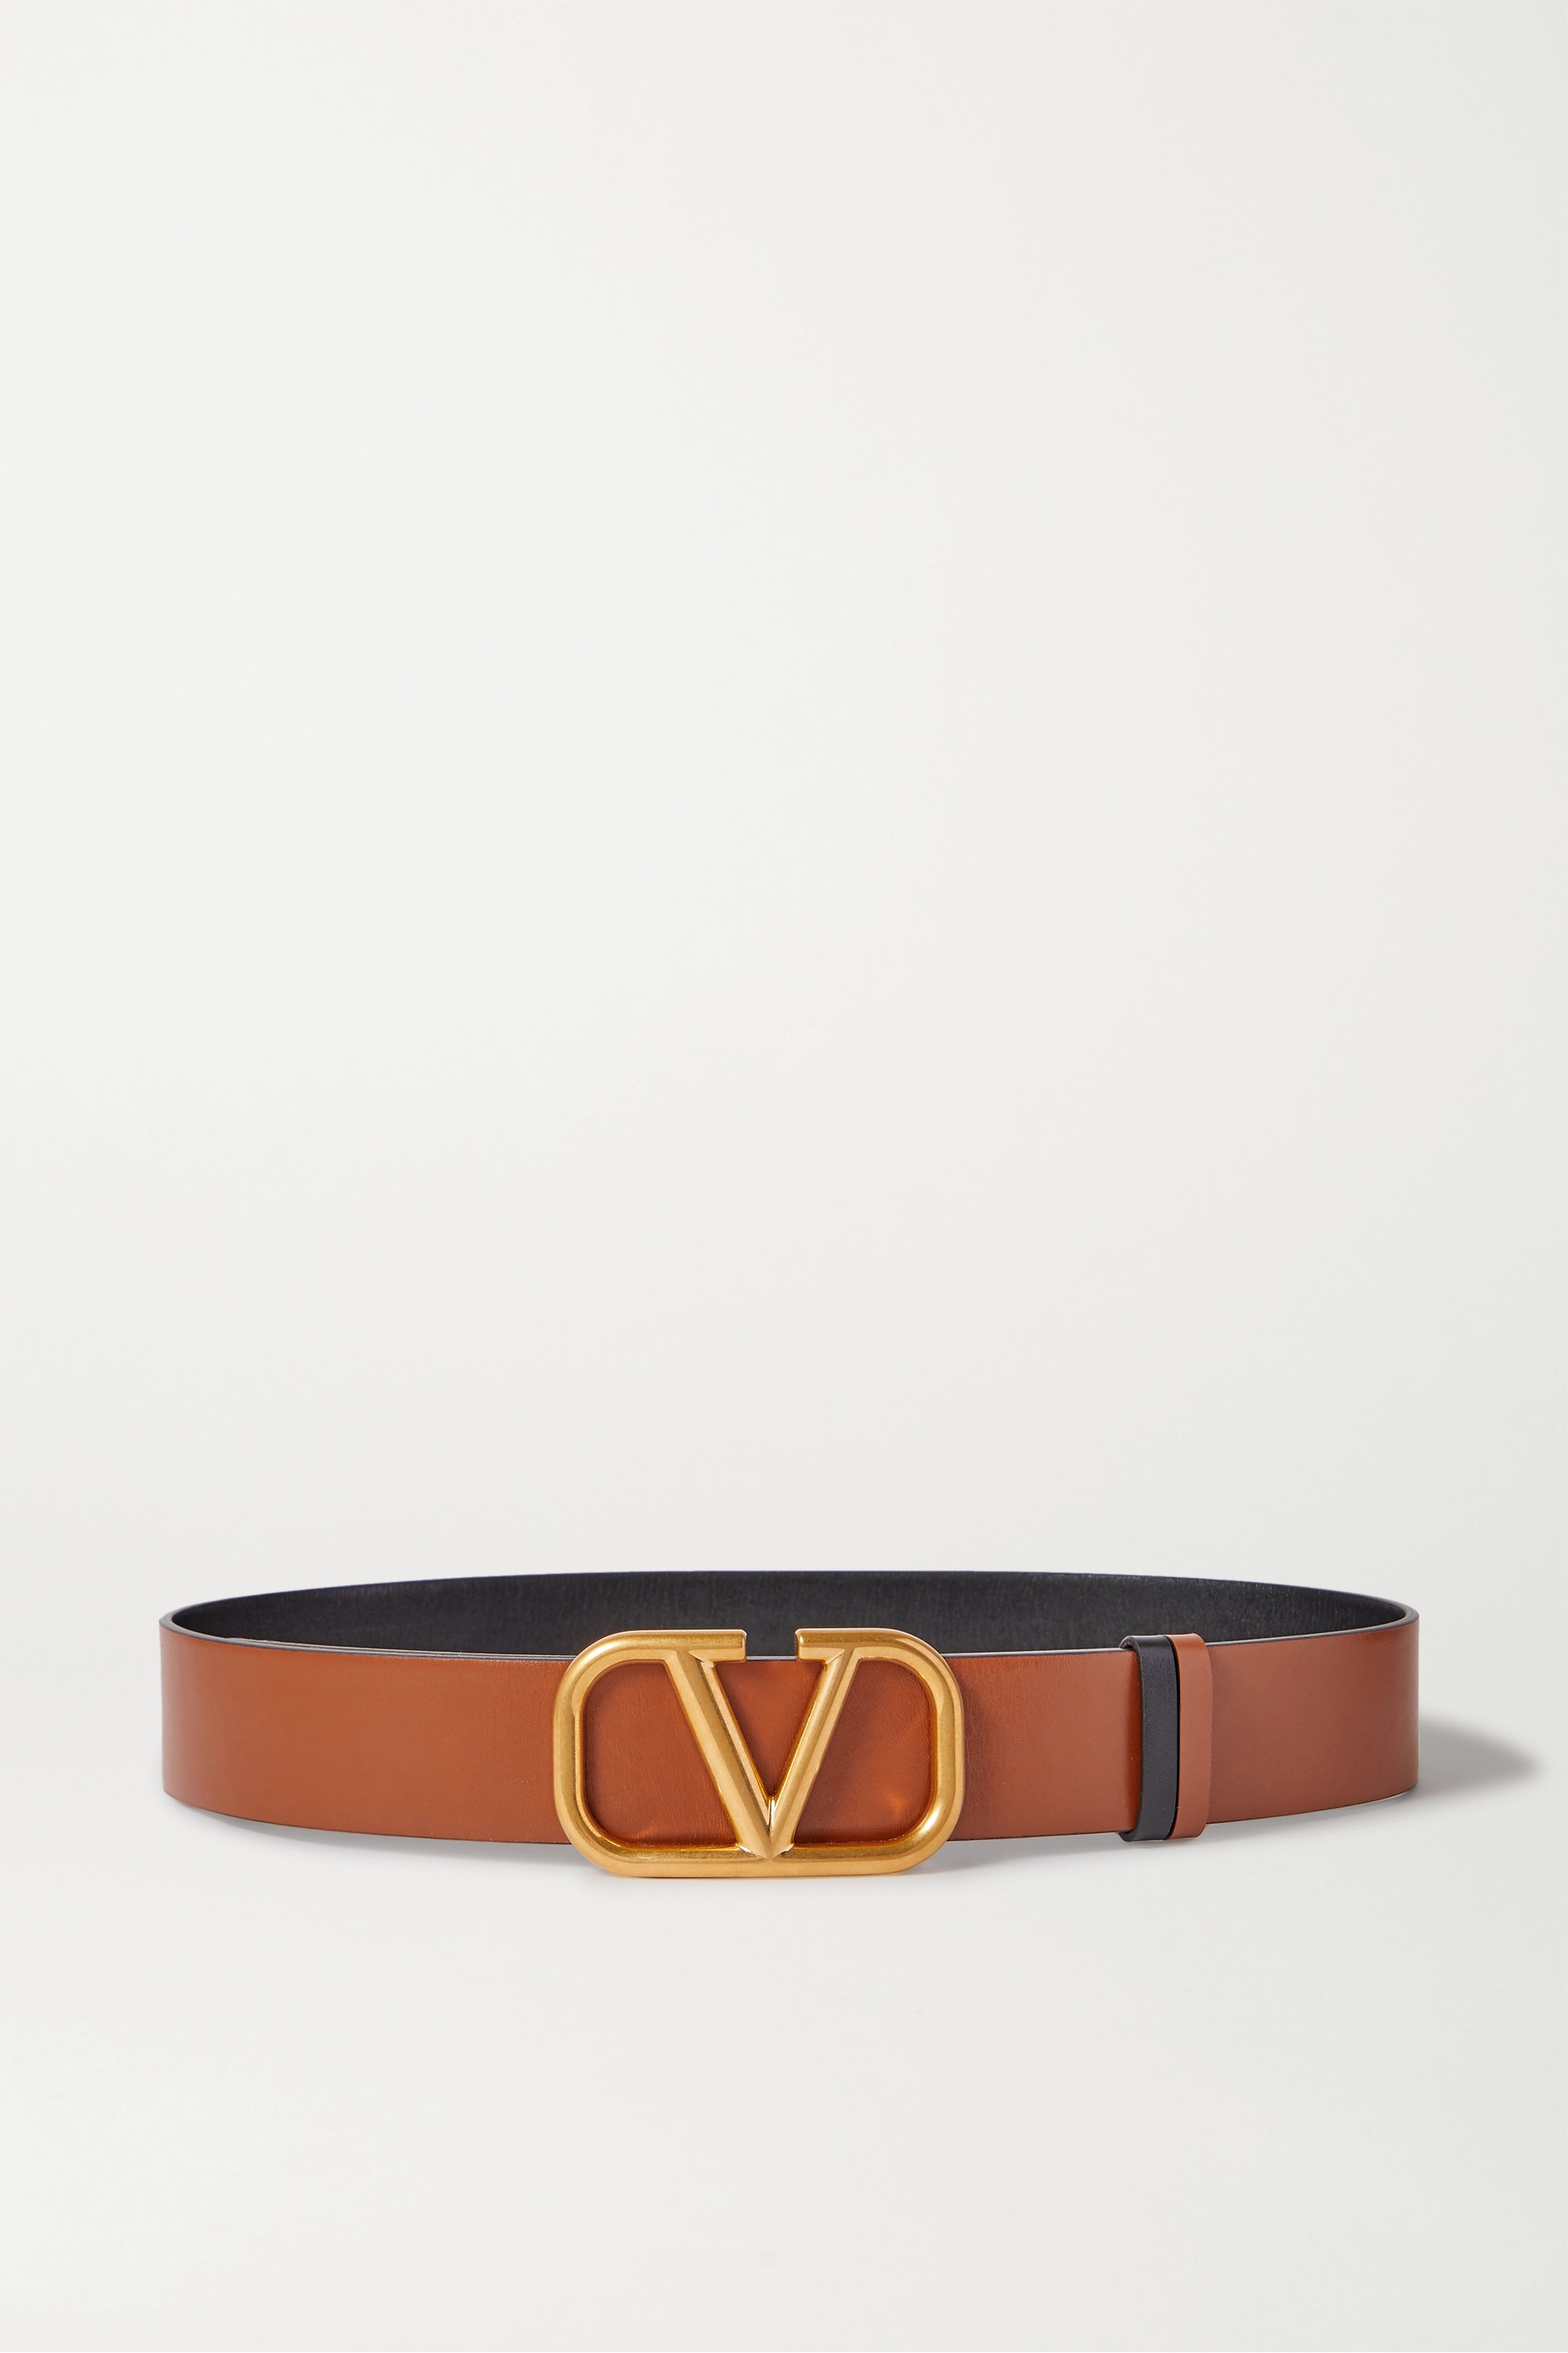 The 10 Most Popular Designer Belts of All Time | Who What Wear